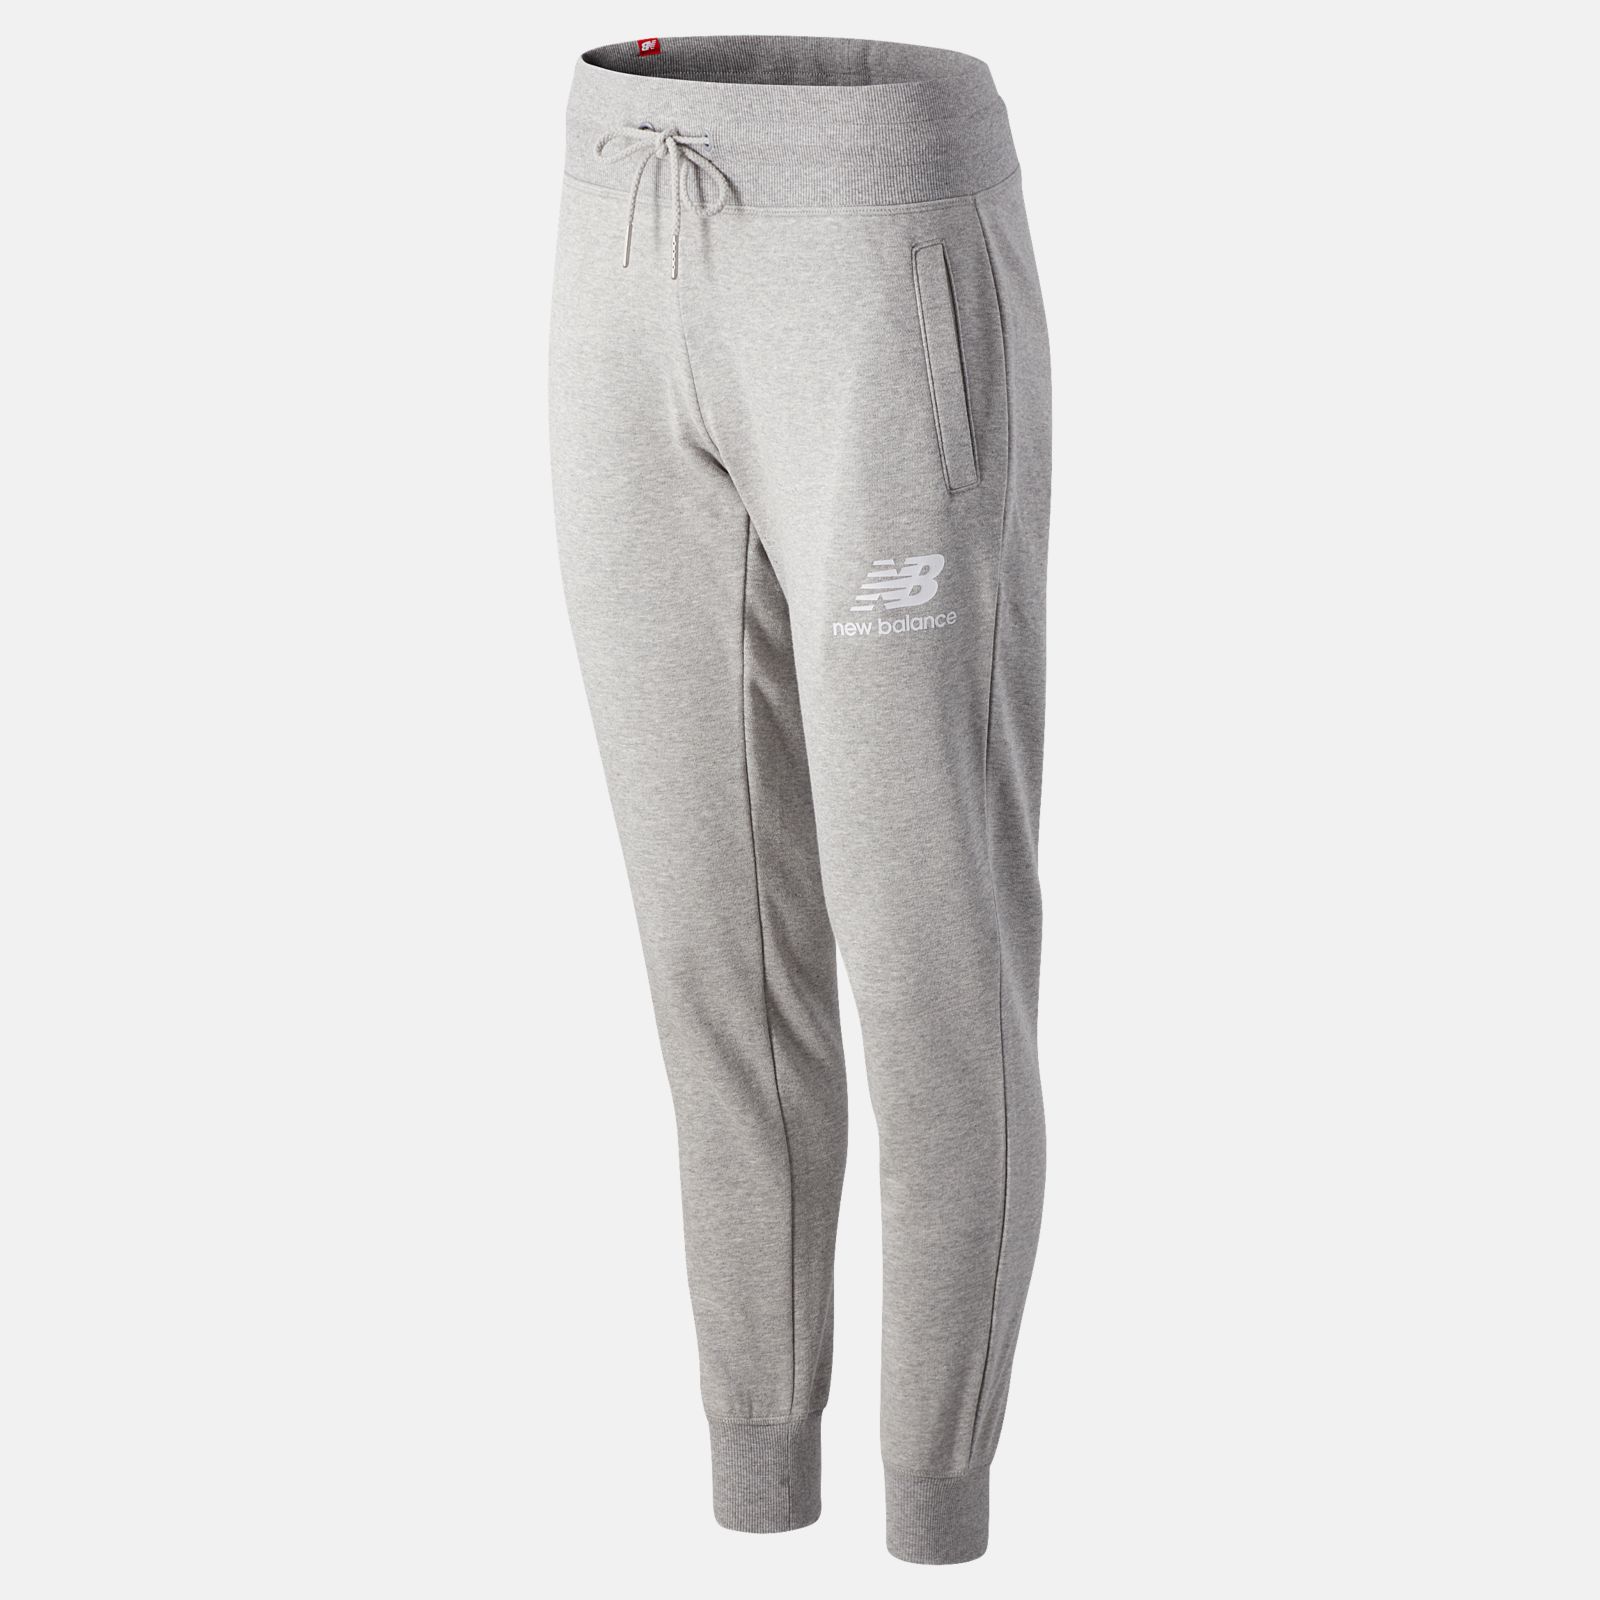 Versnipperd bad overeenkomst NB Essentials French Terry Sweatpant - New Balance